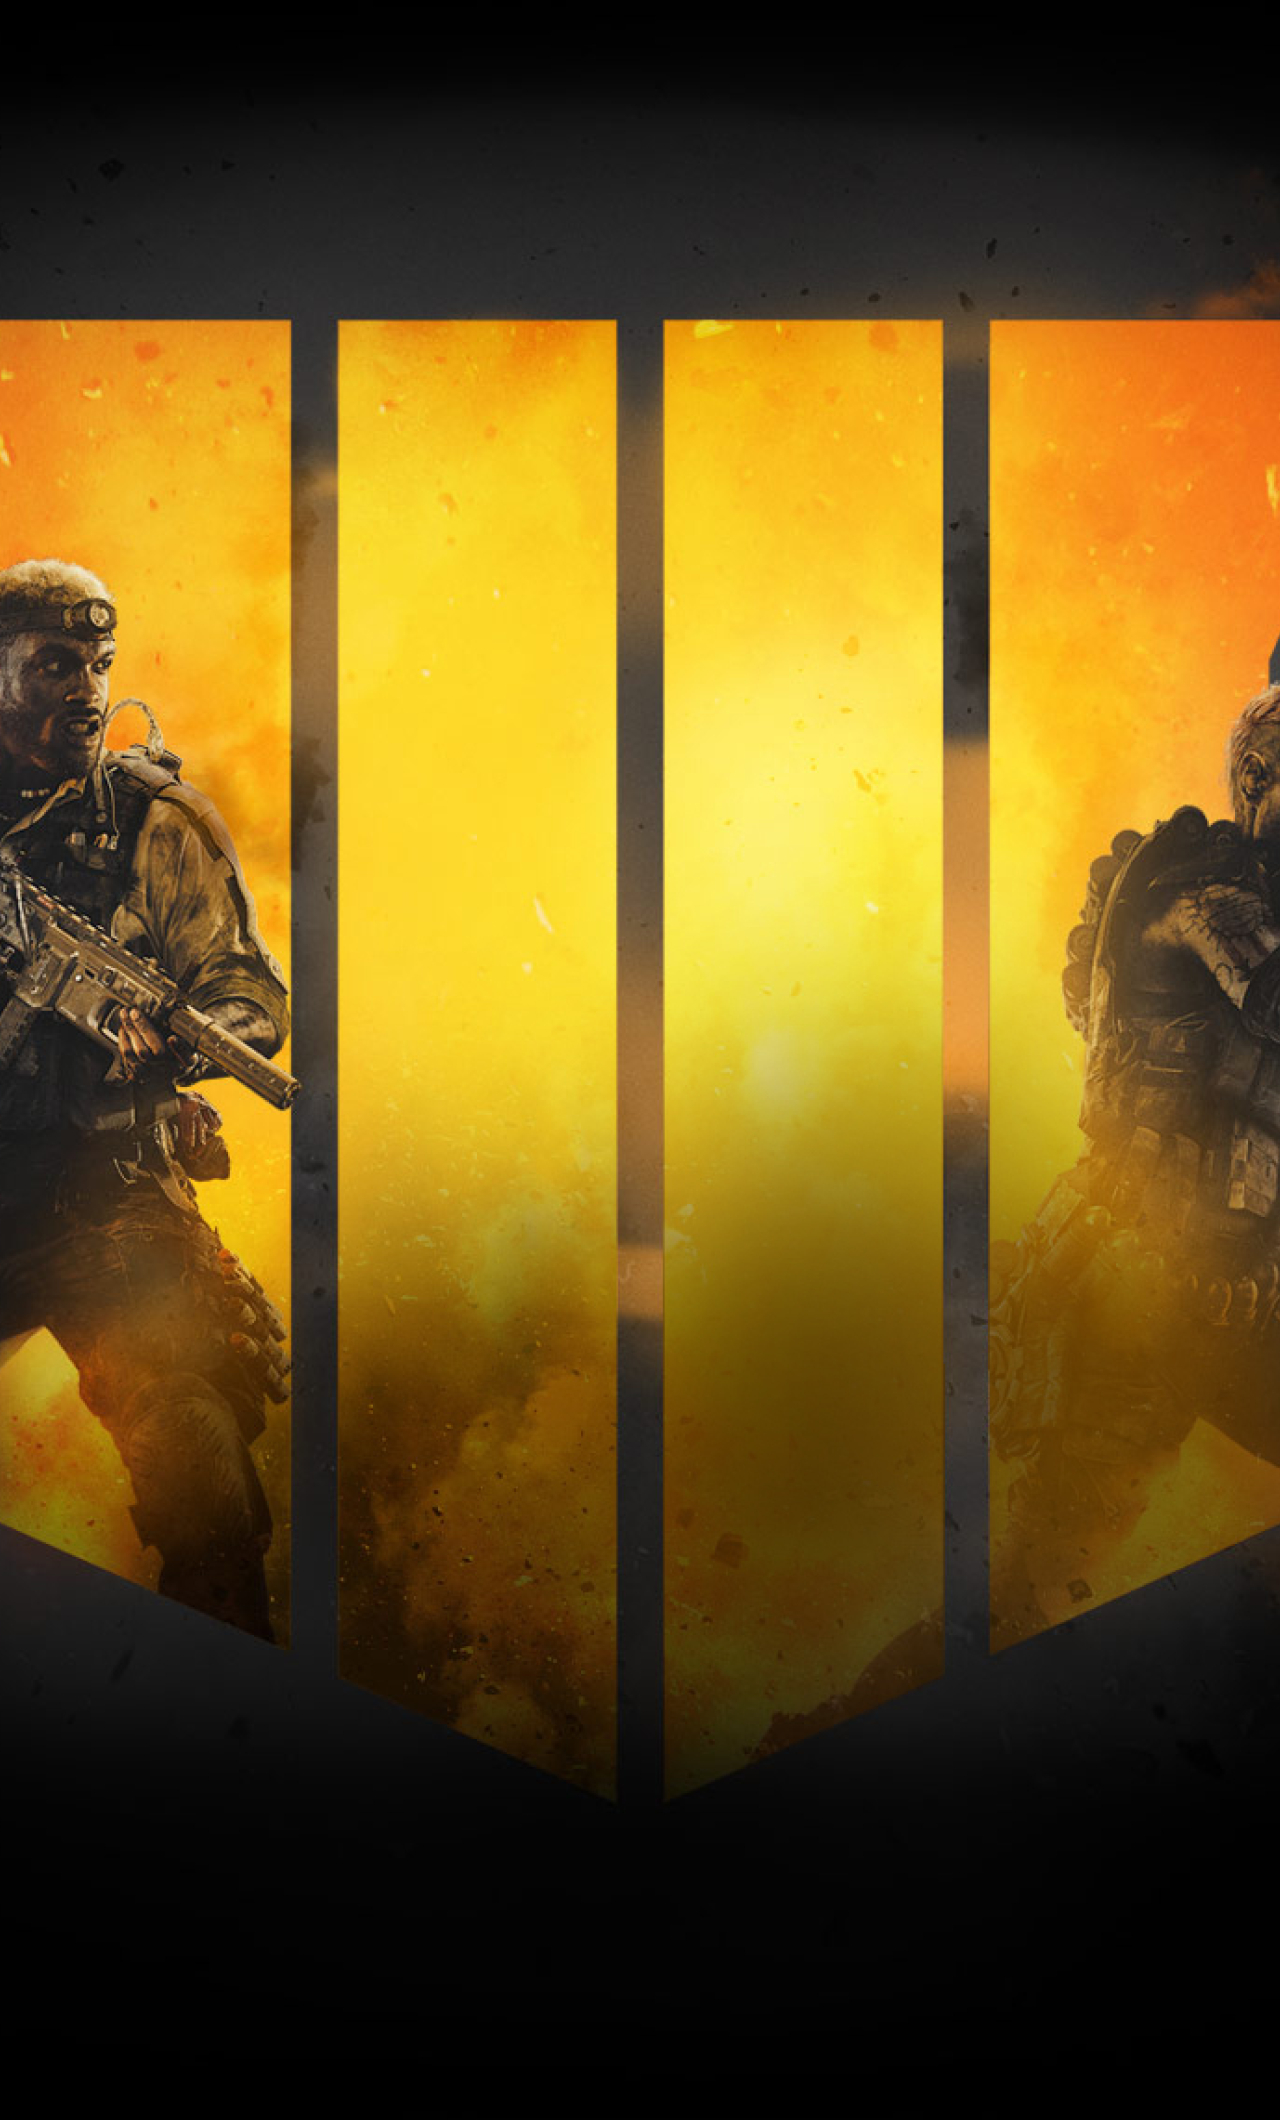 Black Ops 4 Game Poster iPhone 6 plus